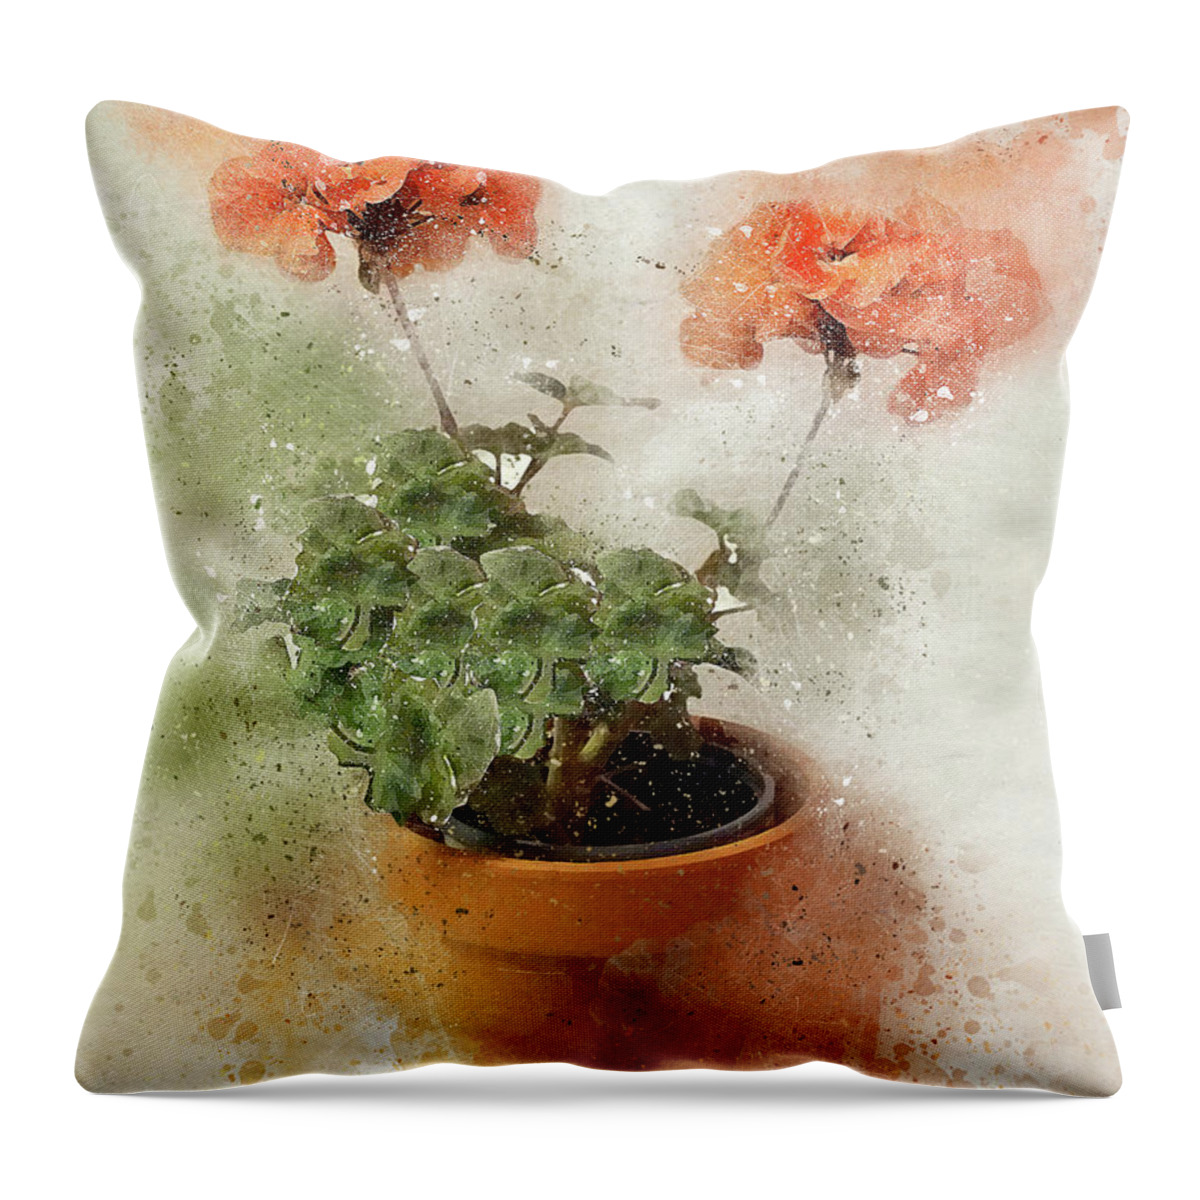 Digital Impressionism Watercolor Flower Floral Nature Plant Peggy Cooper Hendon Cooperhouse Publishing Pink Salmon Green Clay Pot Throw Pillow featuring the photograph Two Geraniums by Peggy Cooper-Hendon